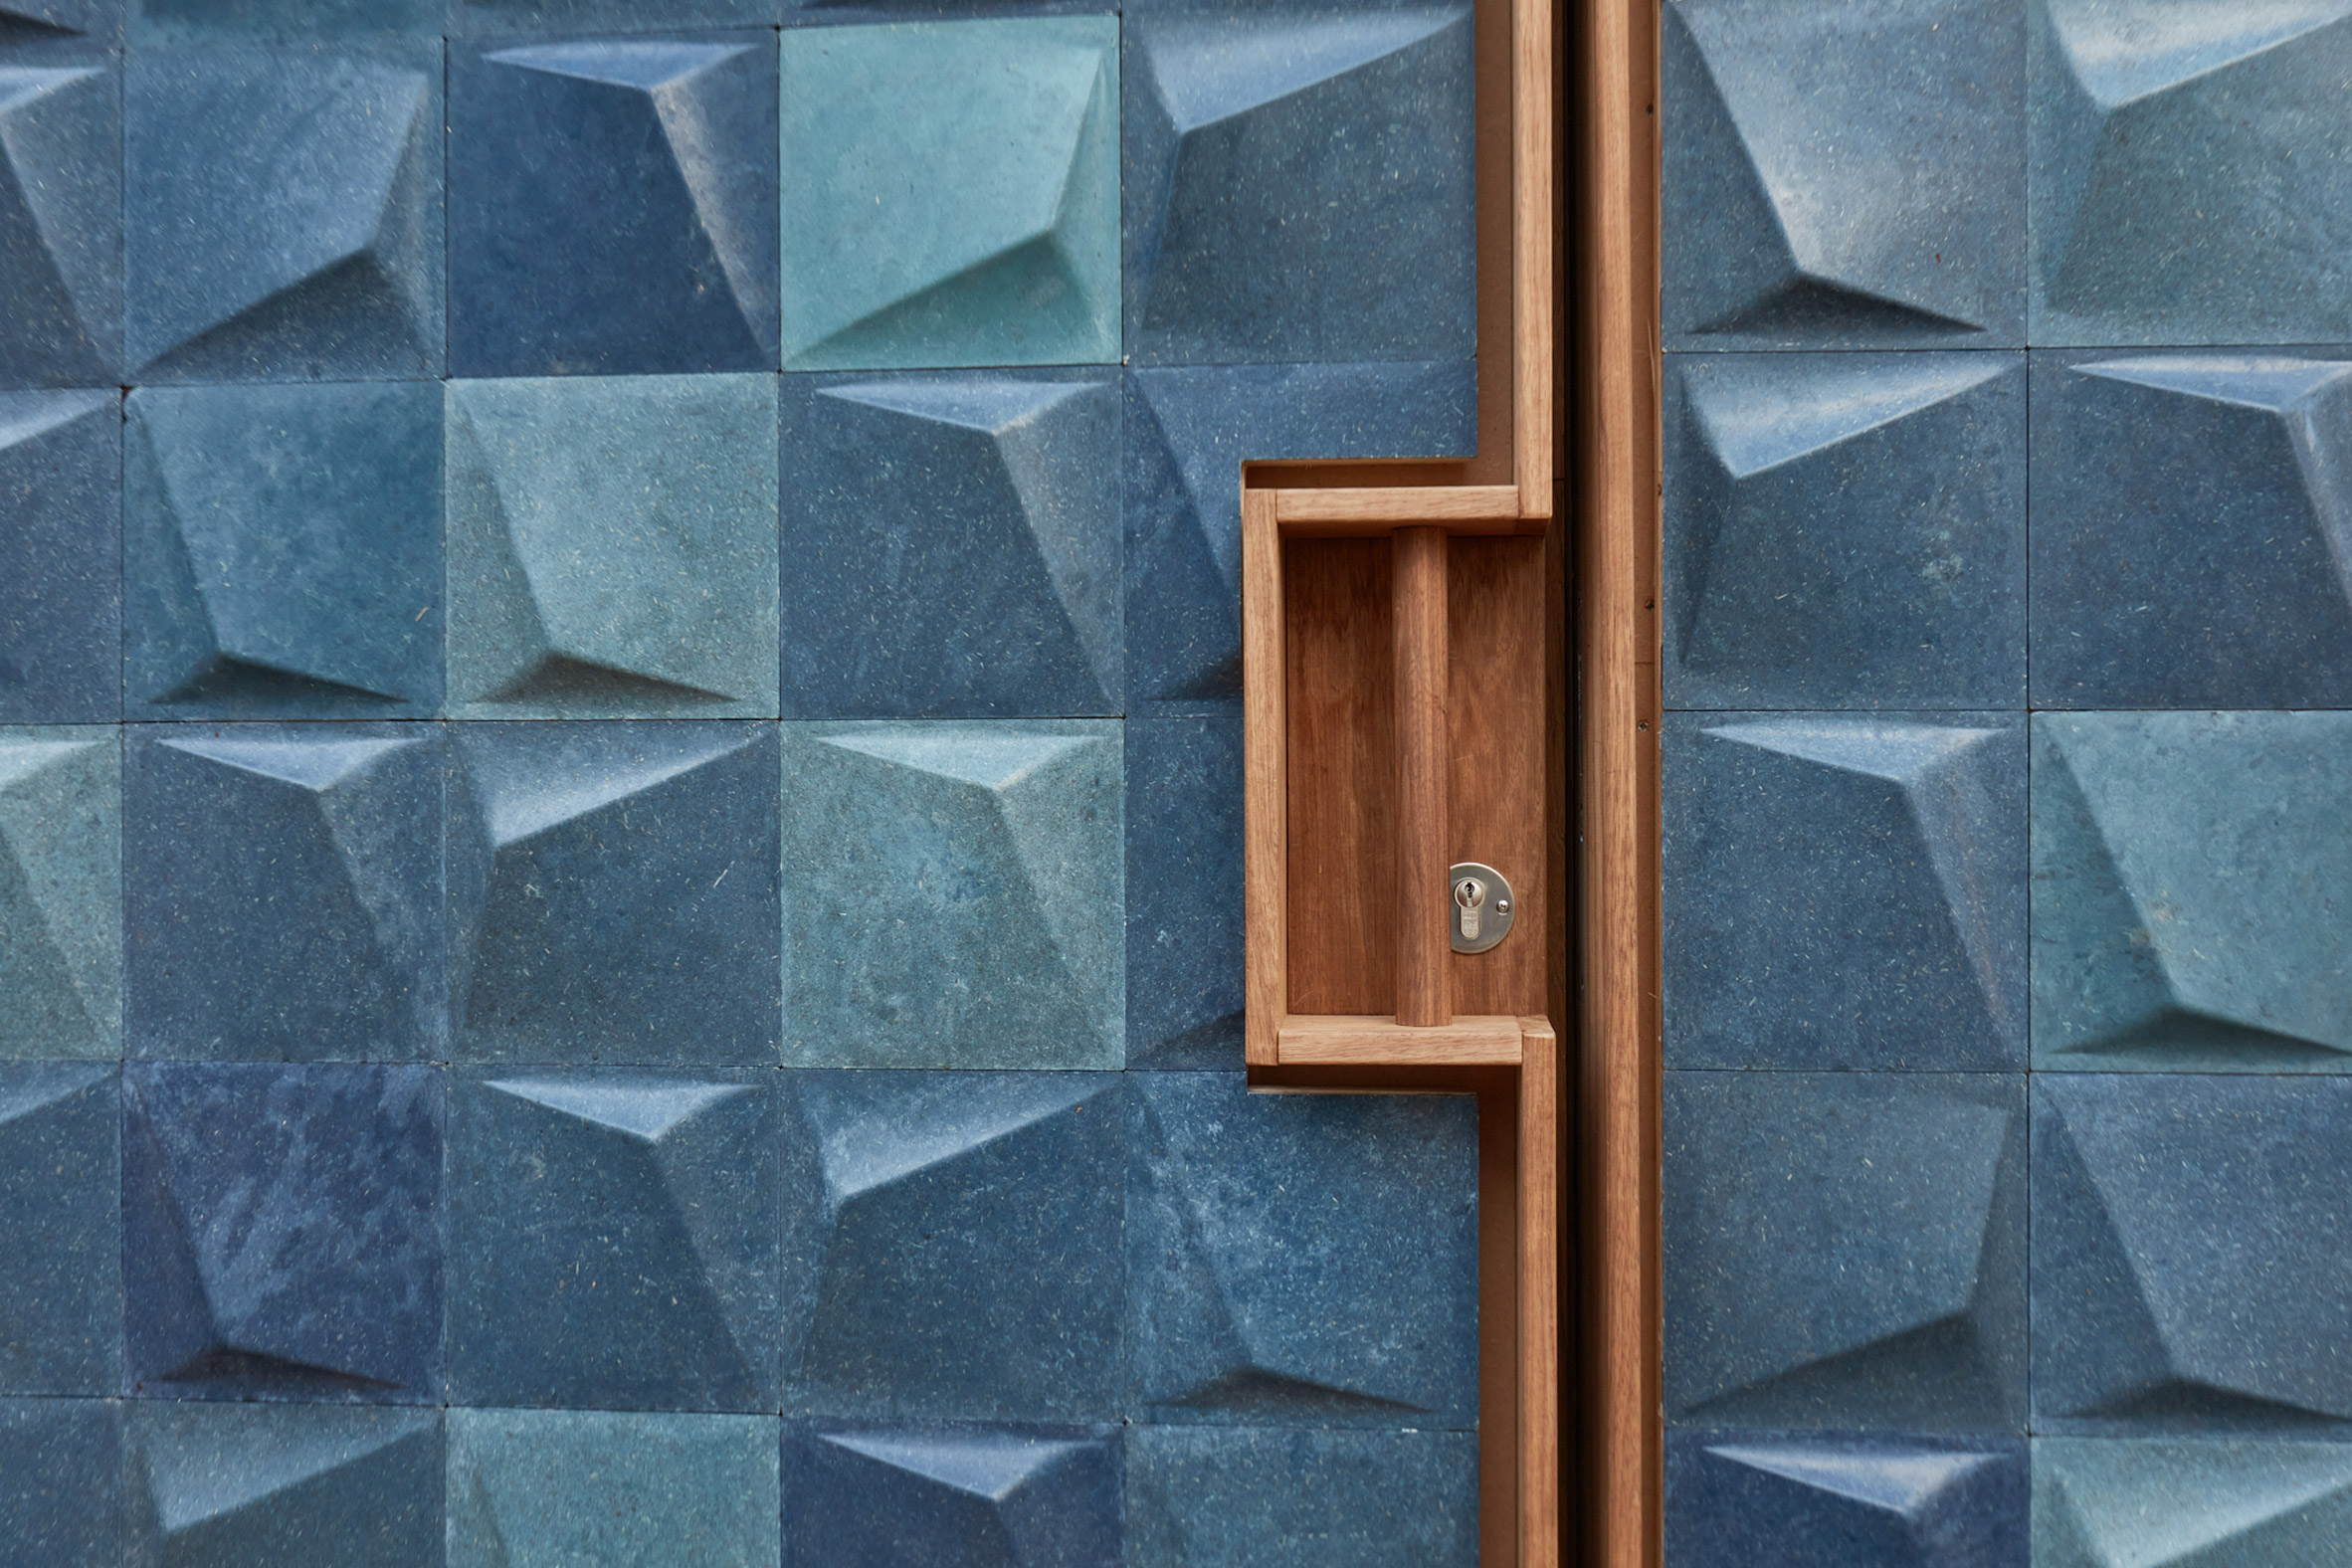 Bathroom wall tiles made from waste in biomaterials house by Biobased Creations